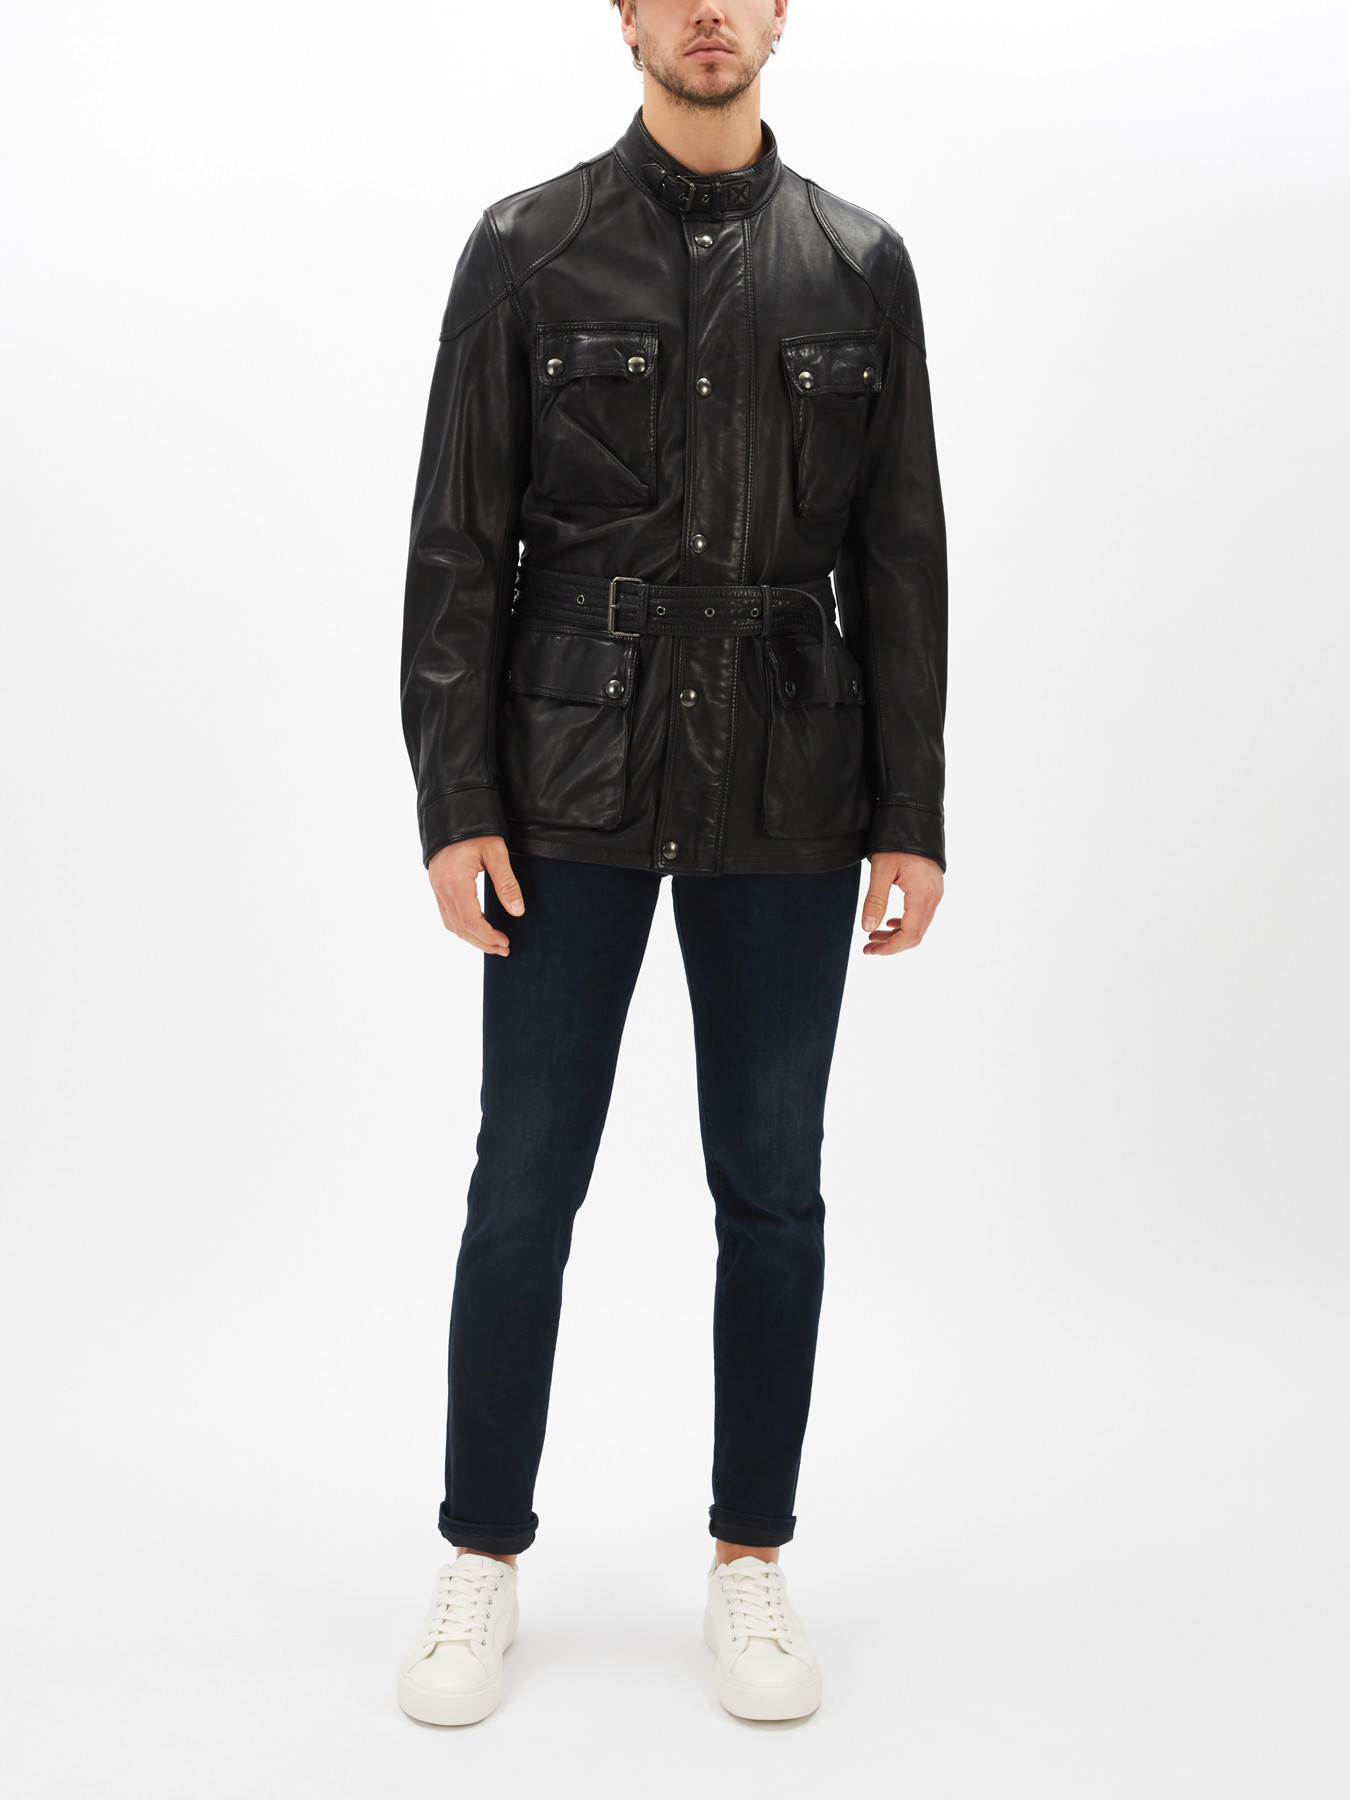 Belstaff Trialmaster Panther Leather Jacket | Leather Jackets | Fenwick